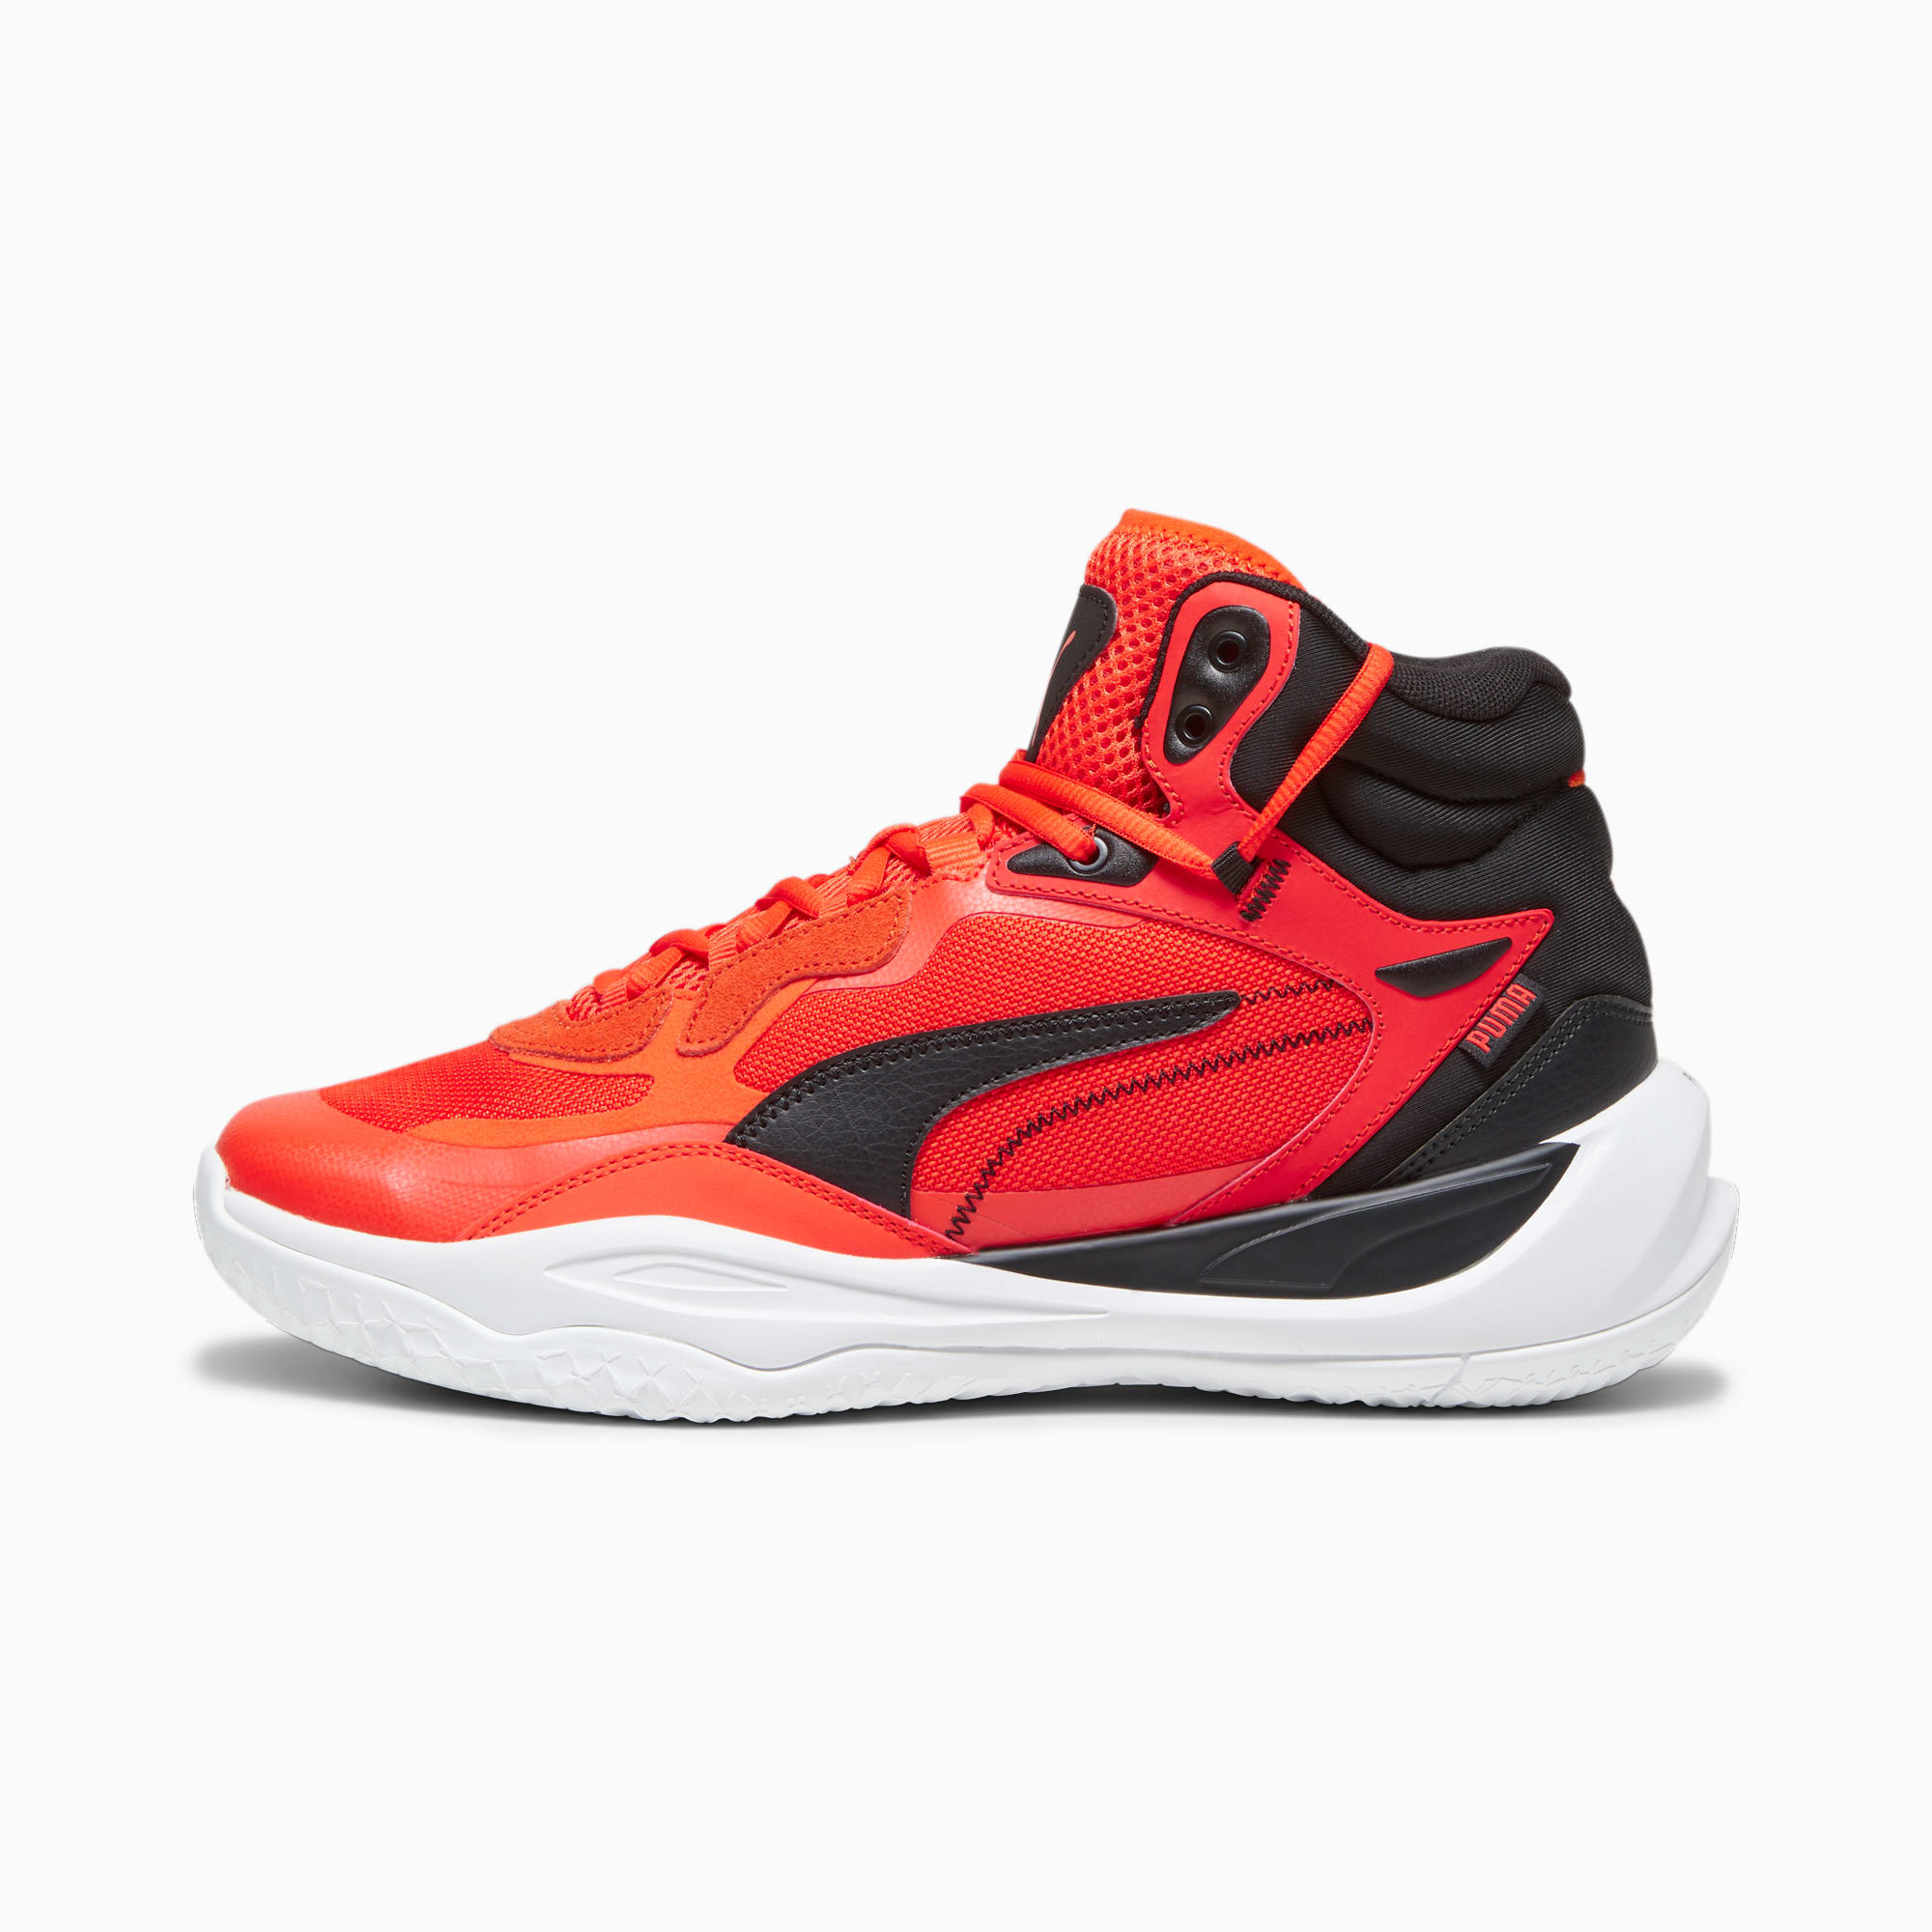 Playmaker Pro Mid Men's Basketball Shoes